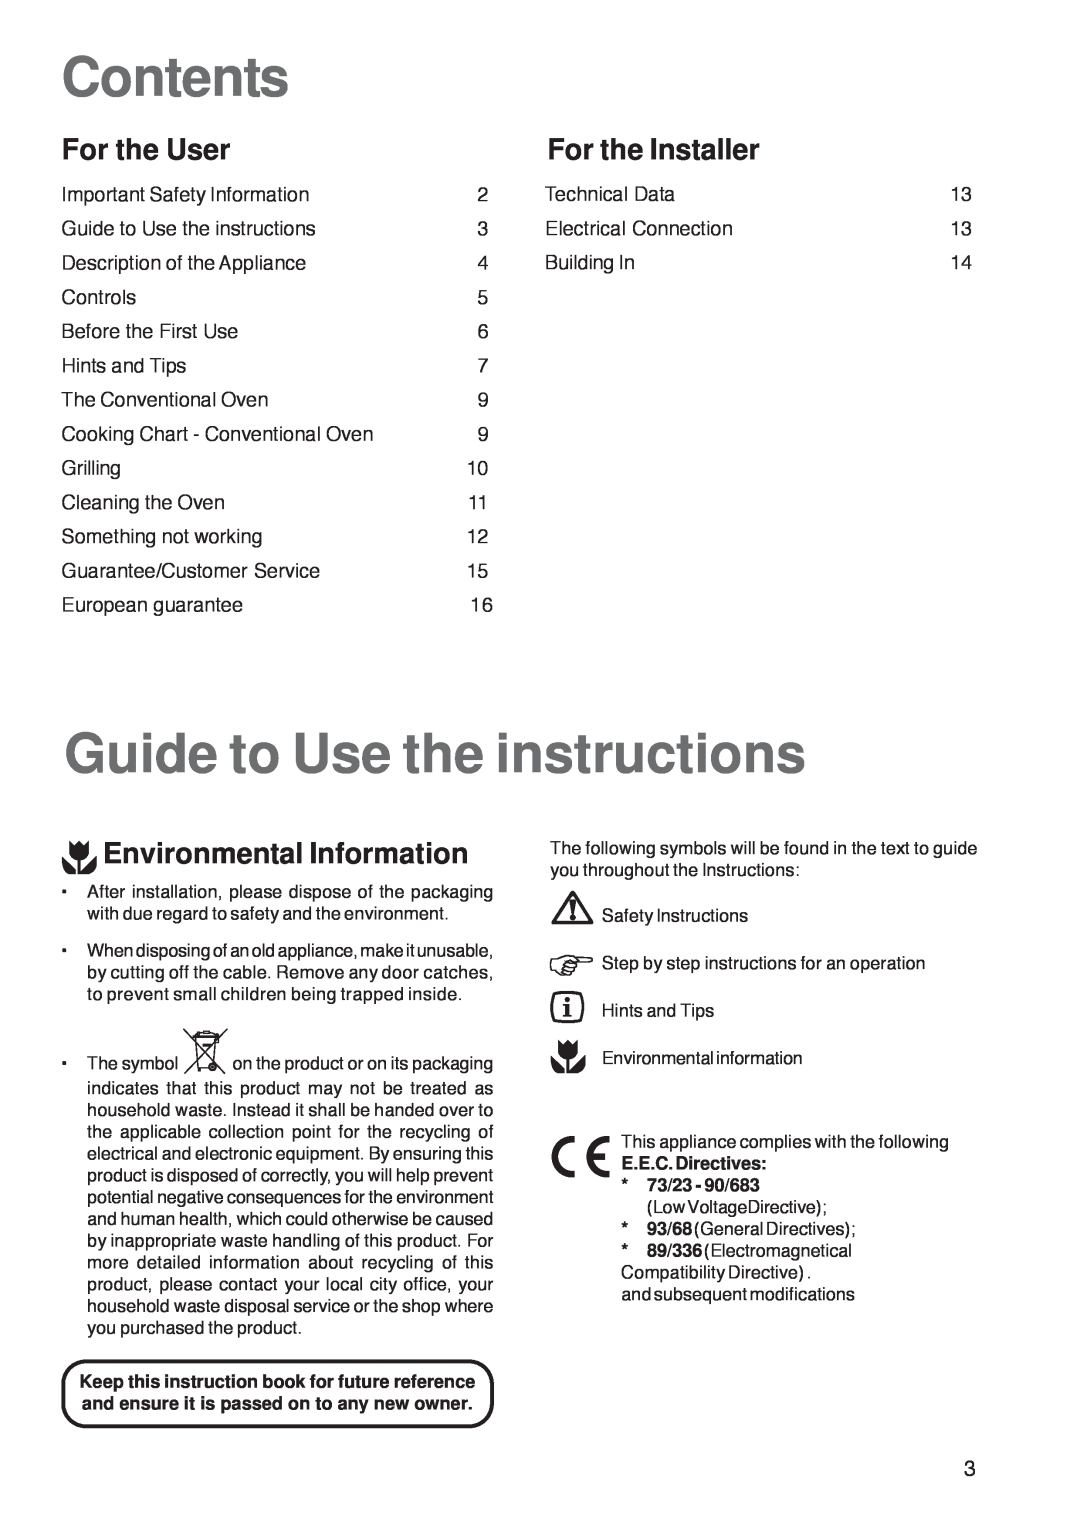 Zanussi ZOB 160 manual Contents, Guide to Use the instructions, For the User, For the Installer, Environmental Information 